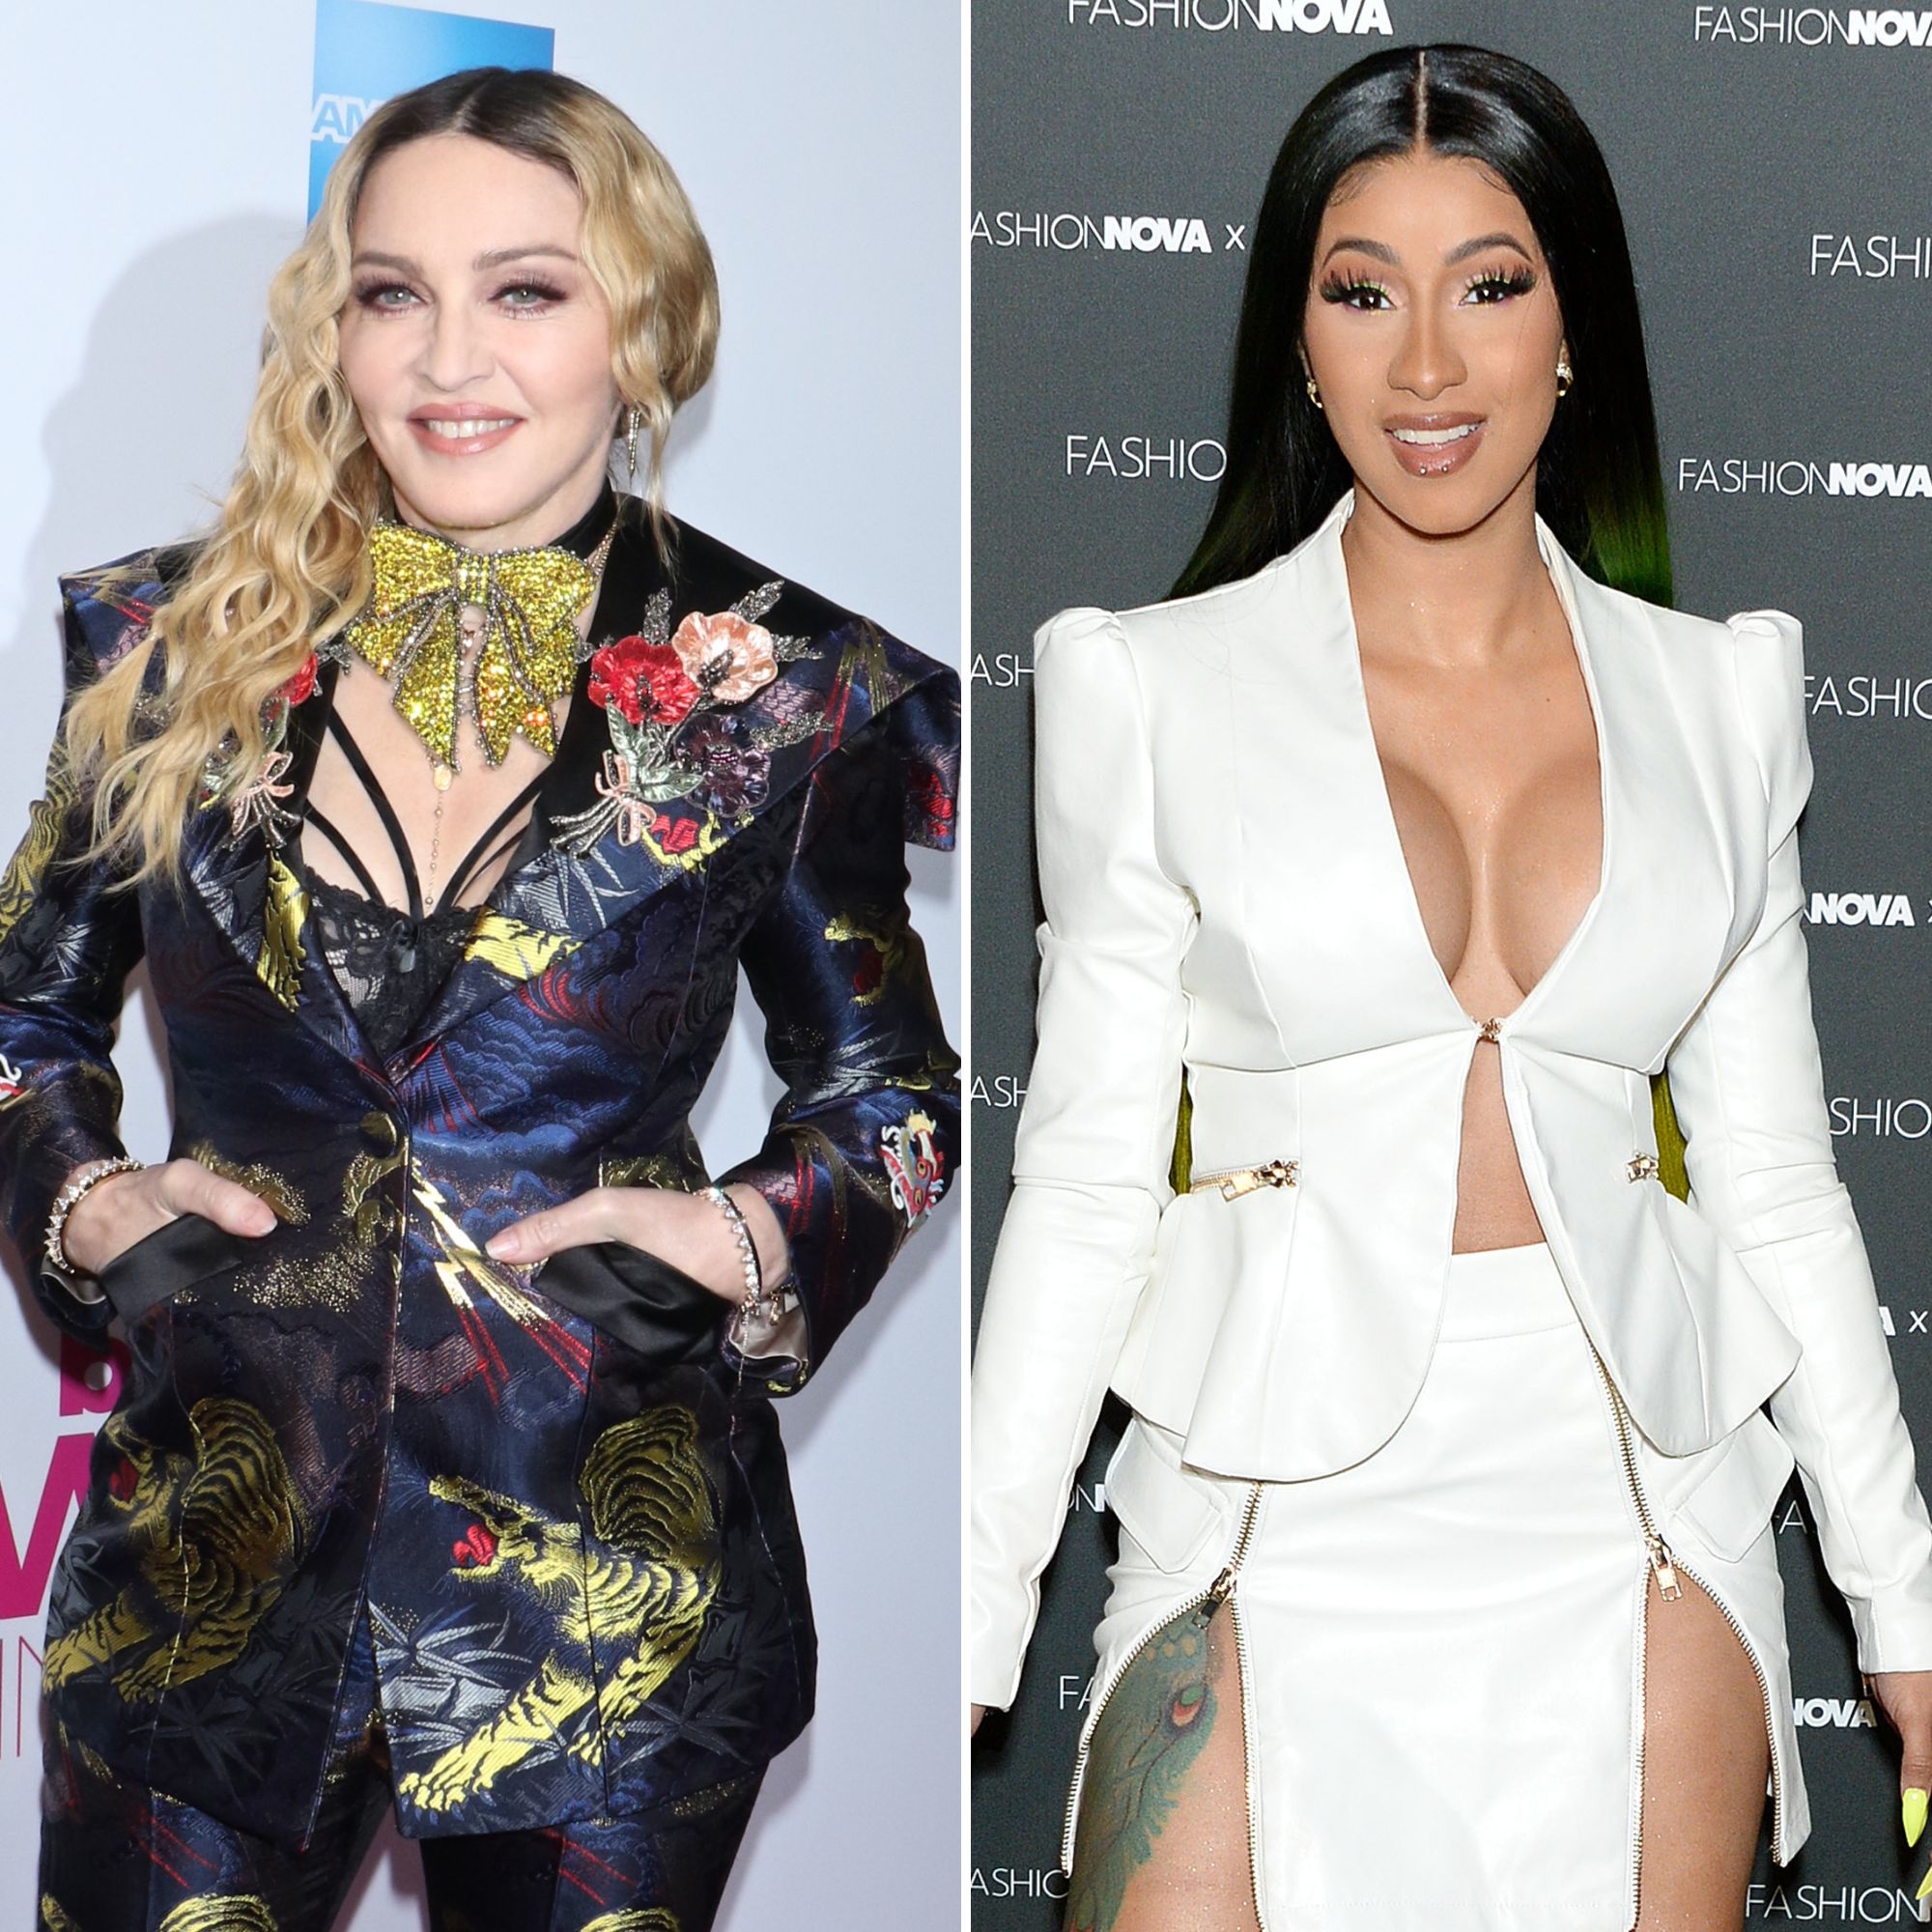 Topless Beach Bitches - Cardi B Slams Madonna Over 'SEX' Comments: Her Statement